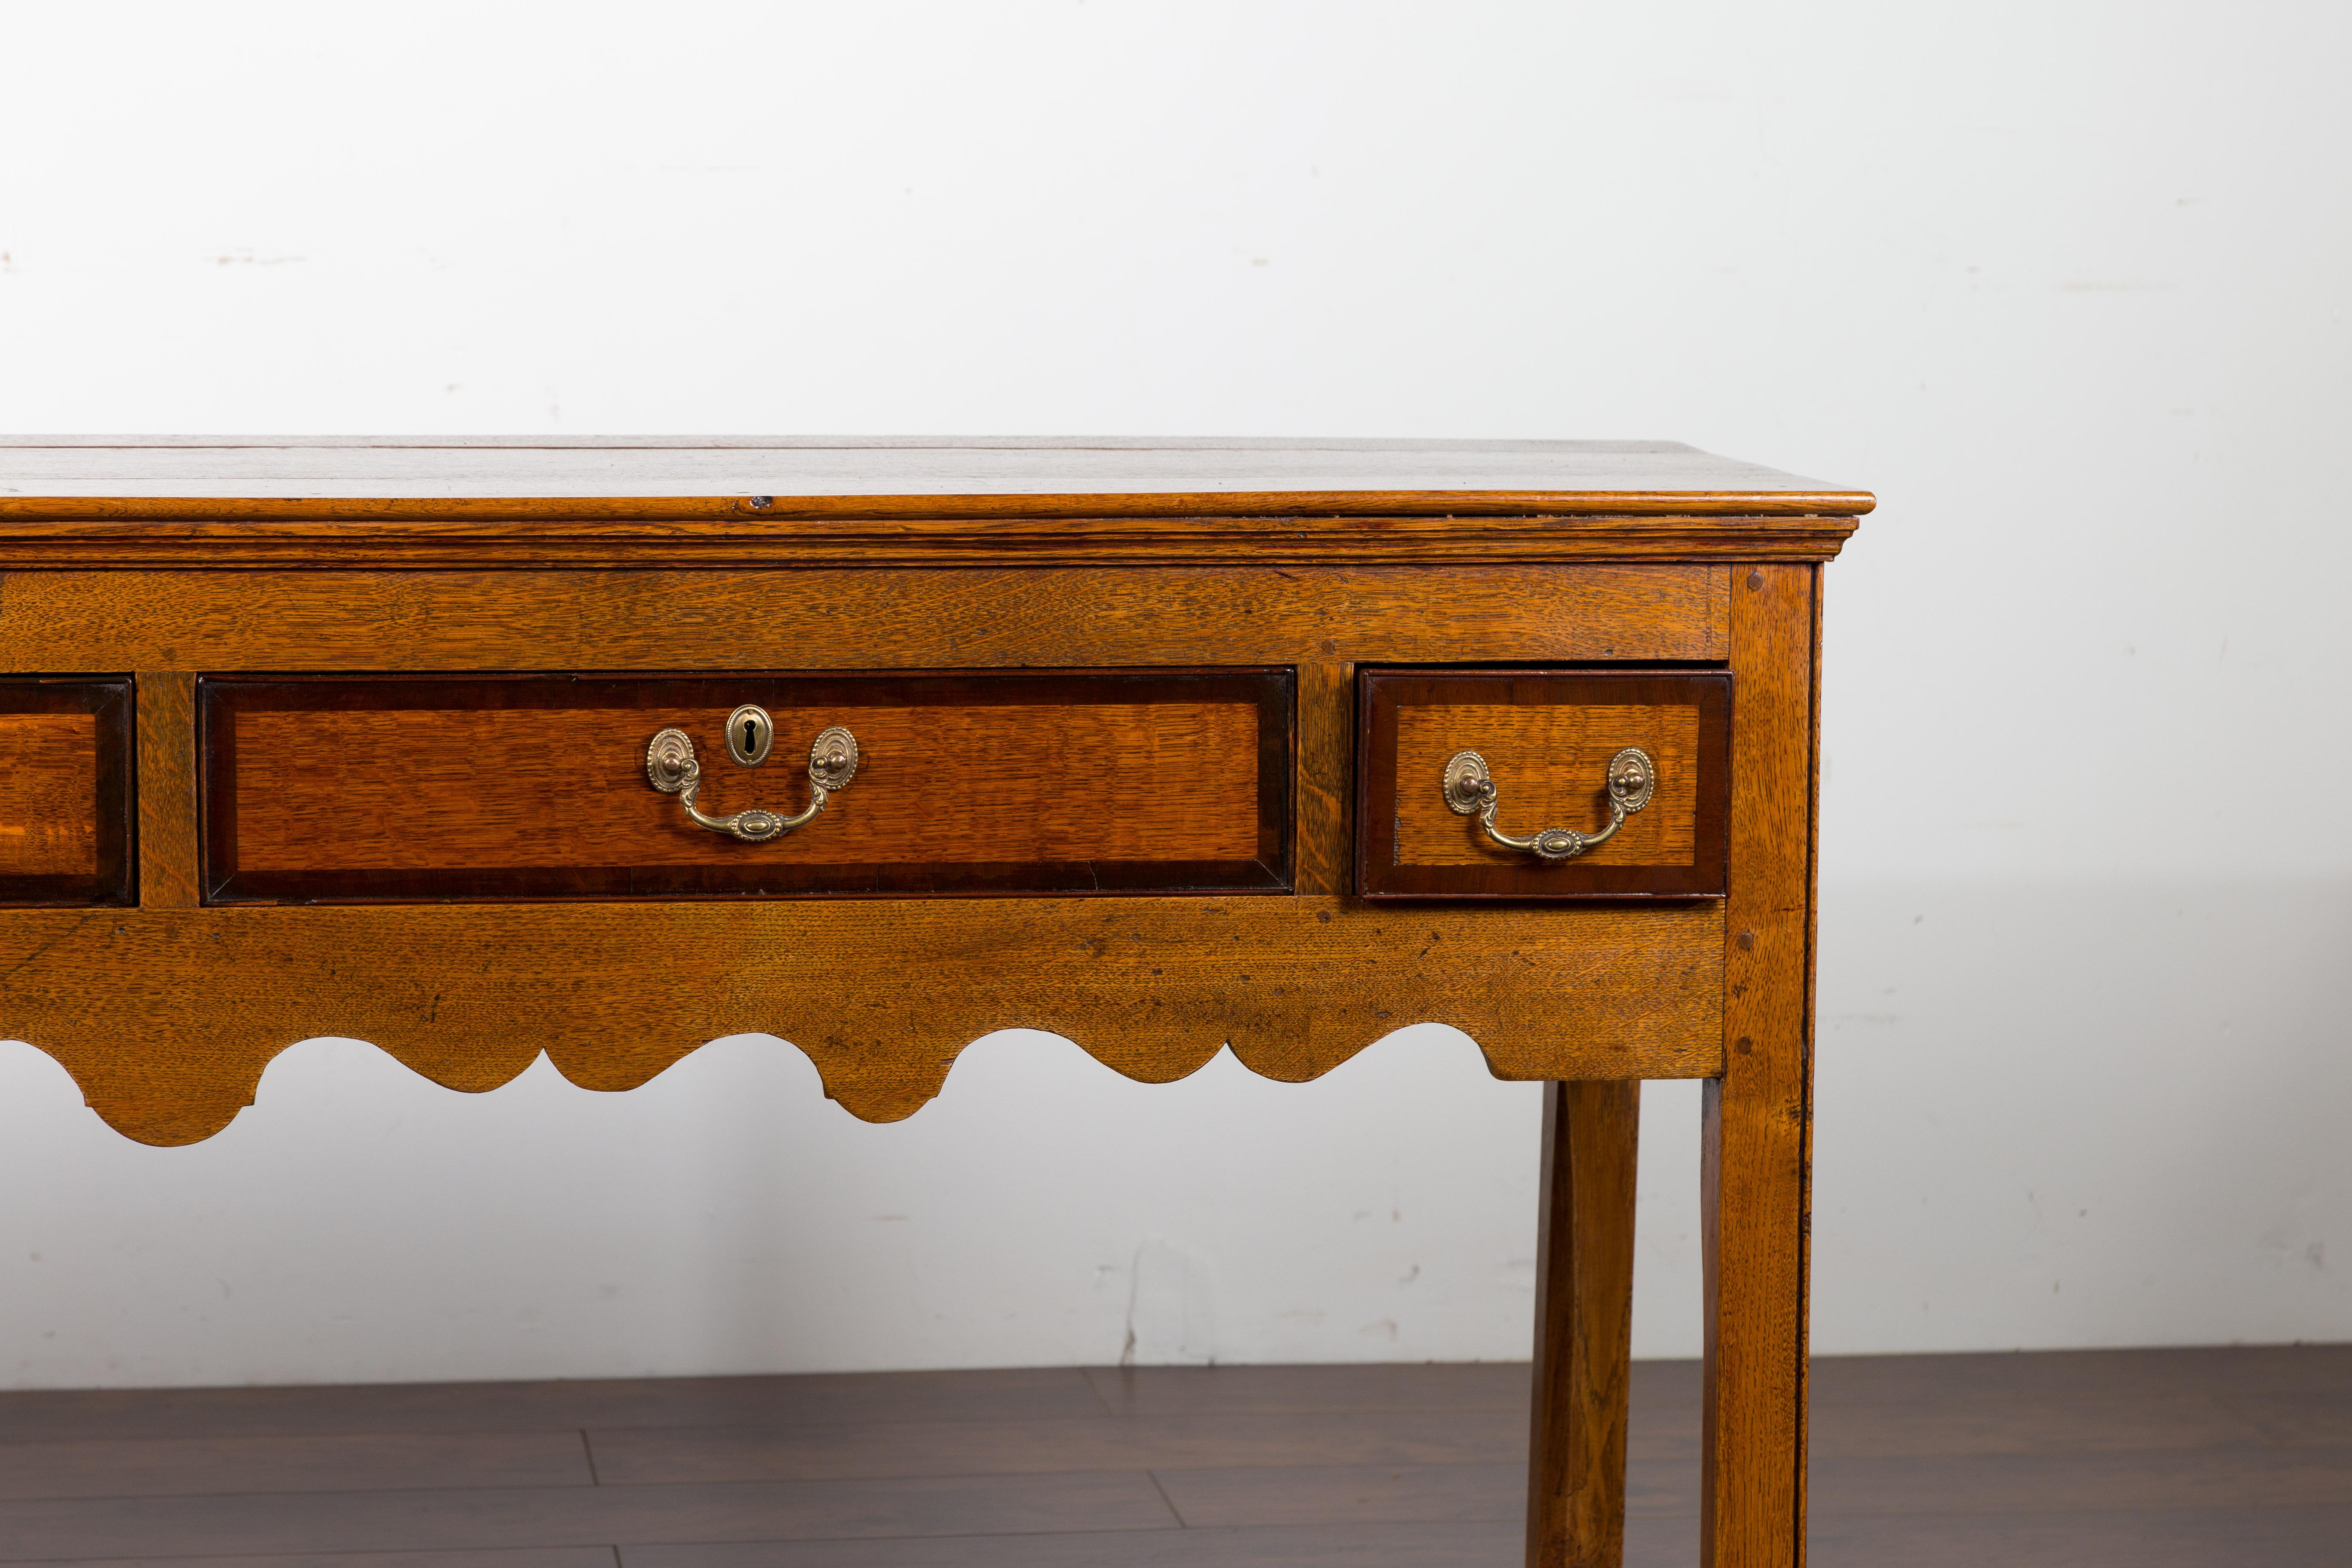 19th Century English 1870s Oak Dresser Base with Two-Toned Drawers and Scalloped Apron